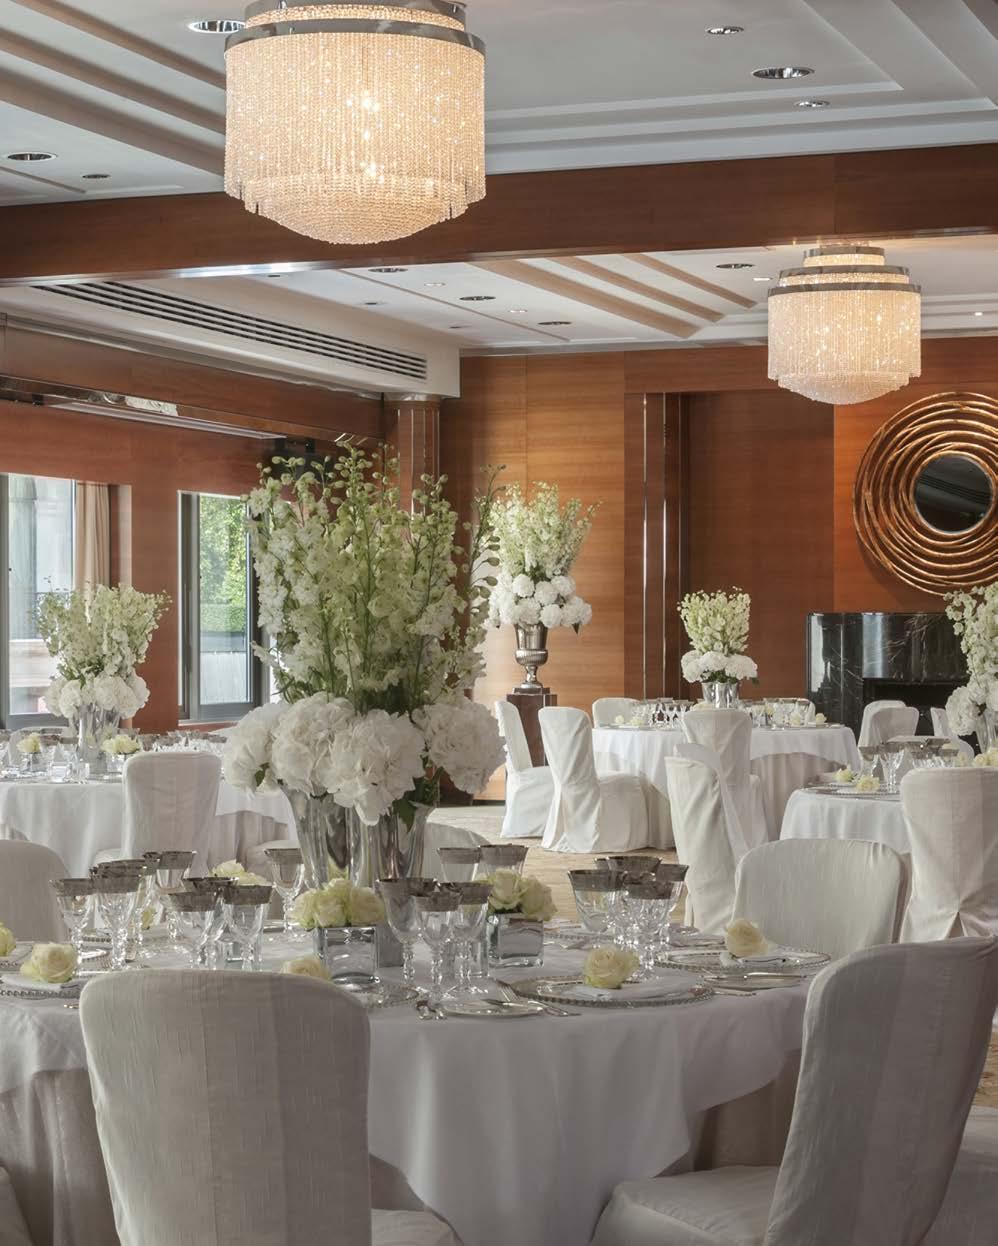 THE BALLROOM The sleek, state of the art Ballroom is elegantly decorated in cherry wood paneling with a centered marble fireplace and a full wall of